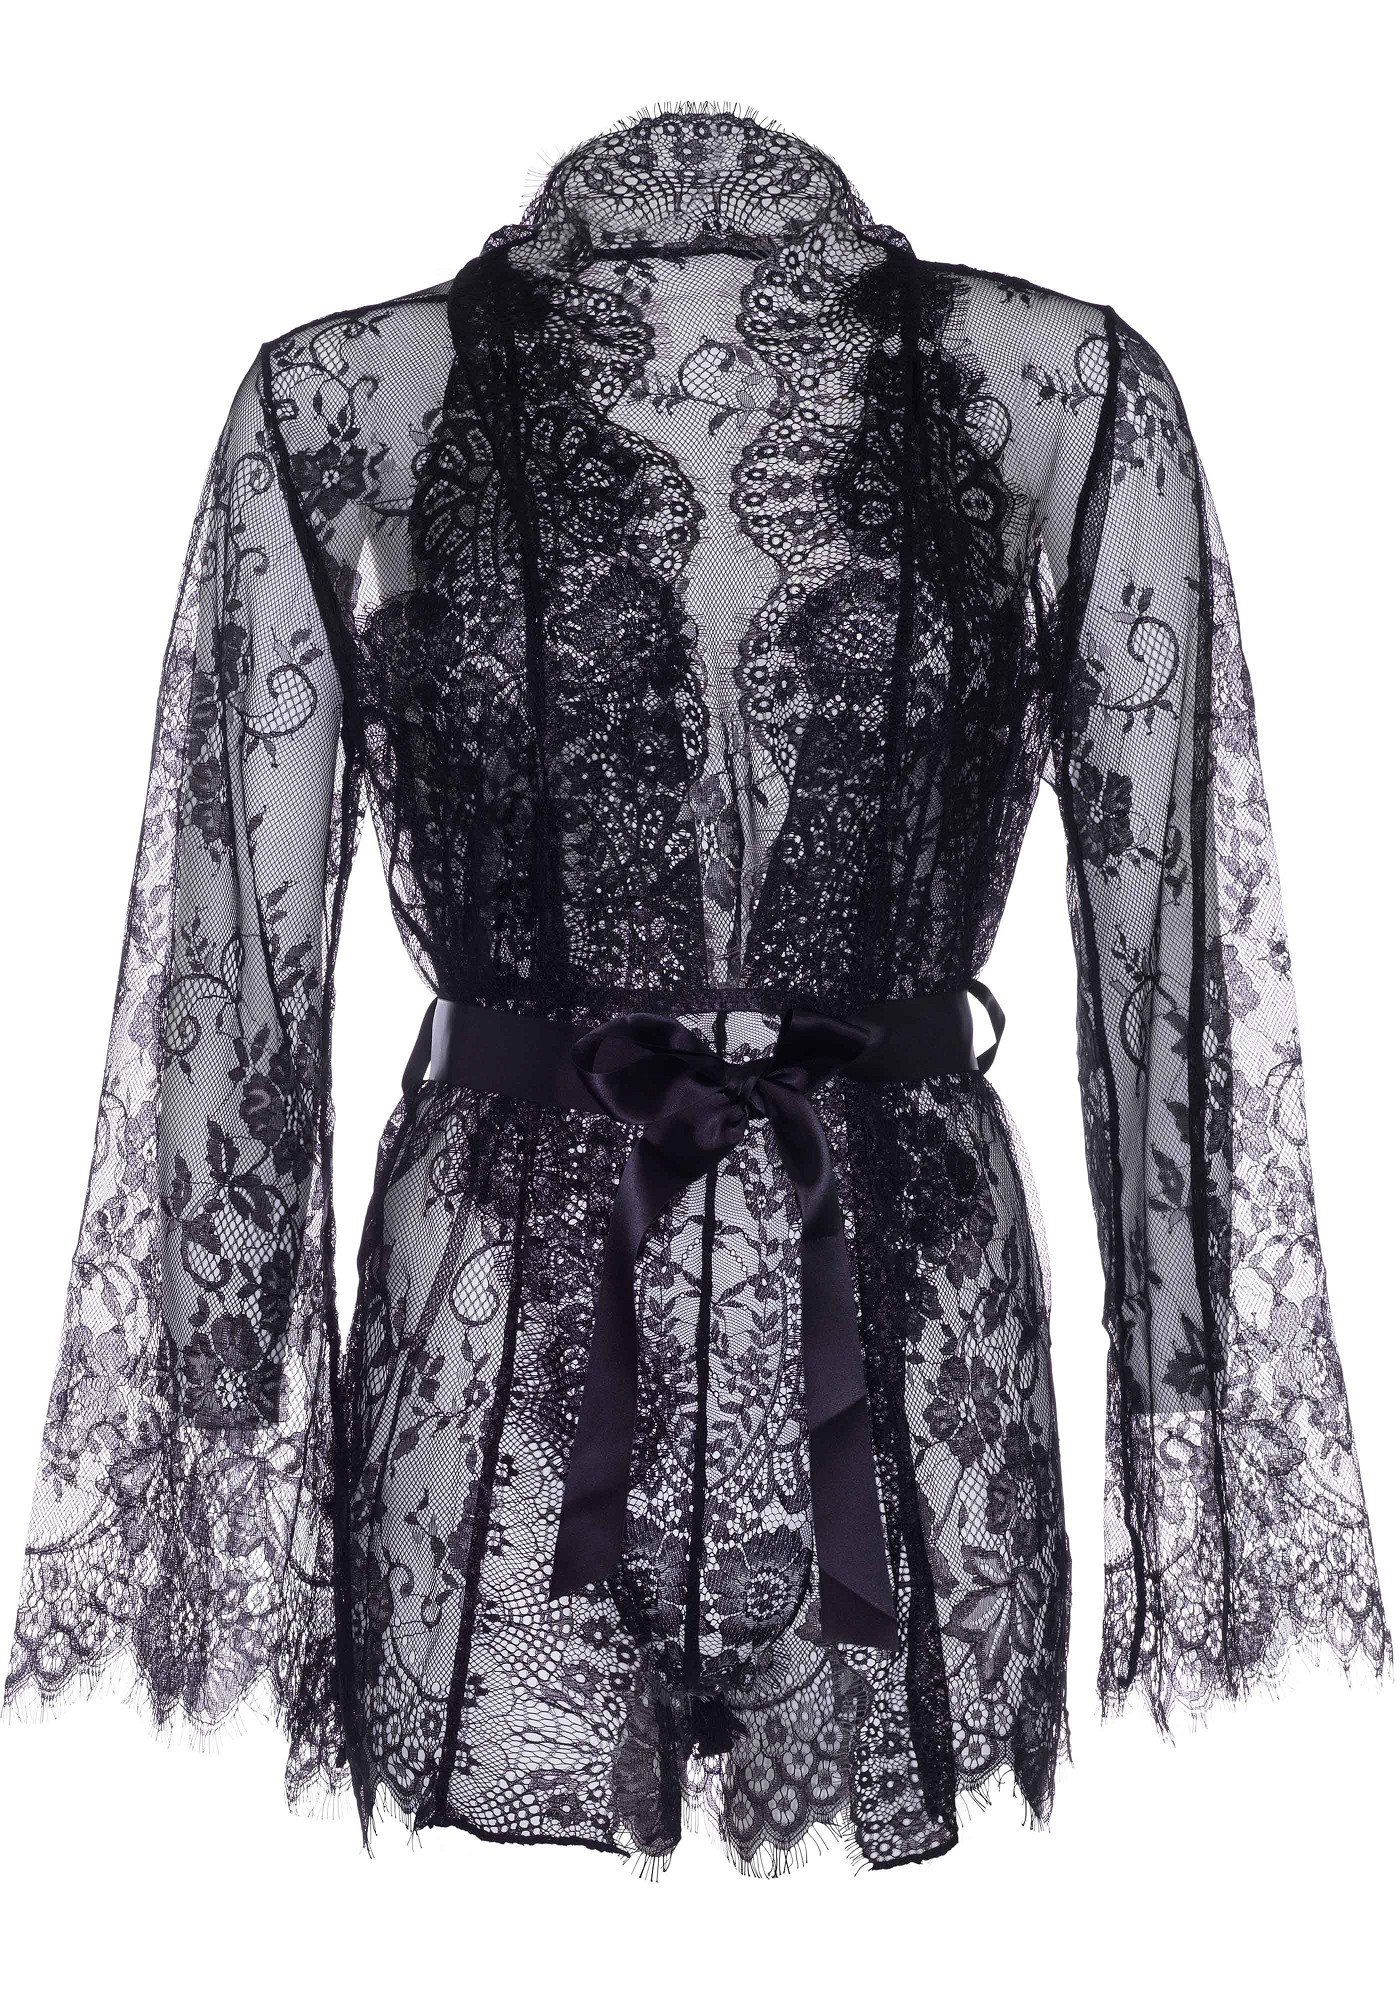 Floral lace teddy & robe